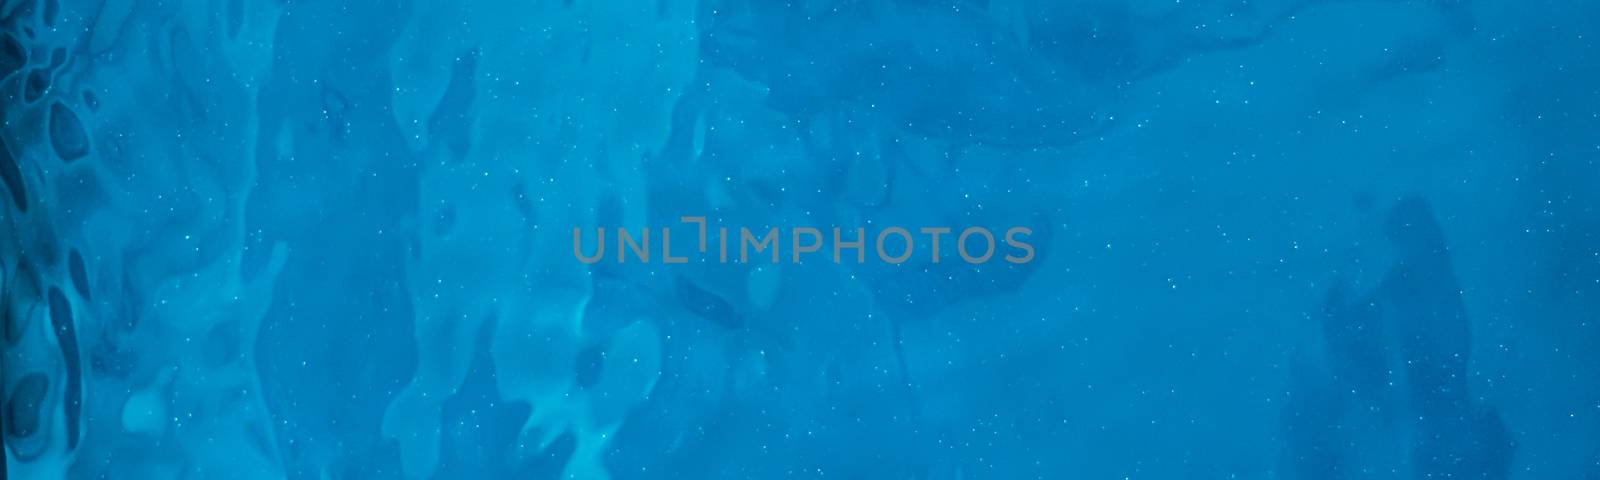 Blue water texture as abstract background, swimming pool and wav by Anneleven